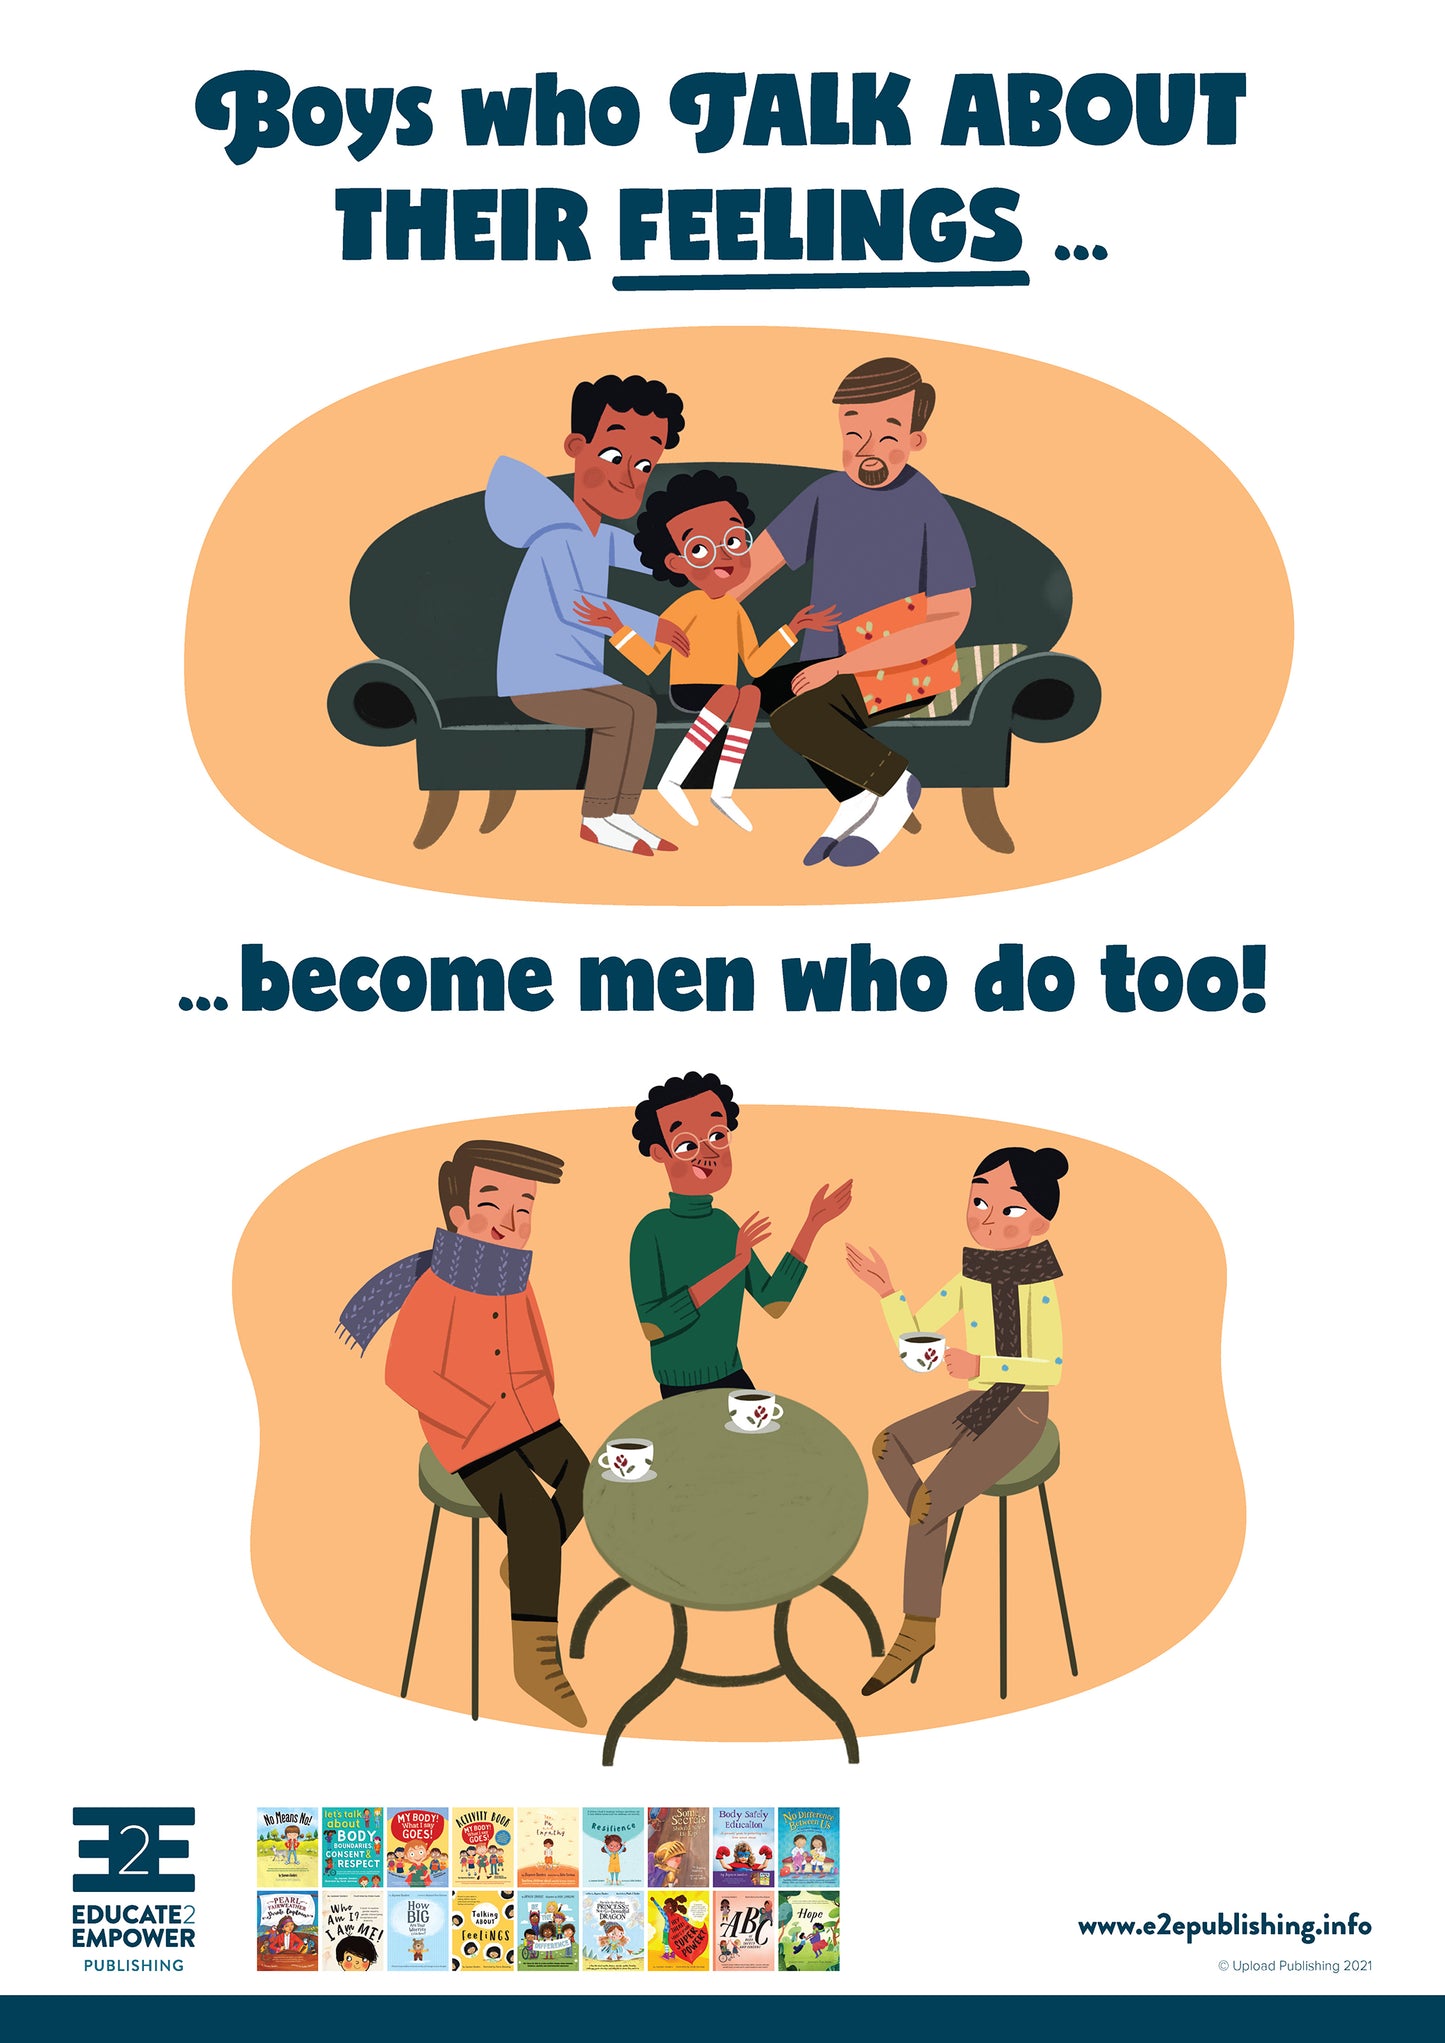 A poster for children titled 'Boys who talk about their feelings... become men who do too!' This is accompanied by a cartoon image of a young boy comfortably talking to his parents and below this the same boy as an adult comfortably talking with his peers.